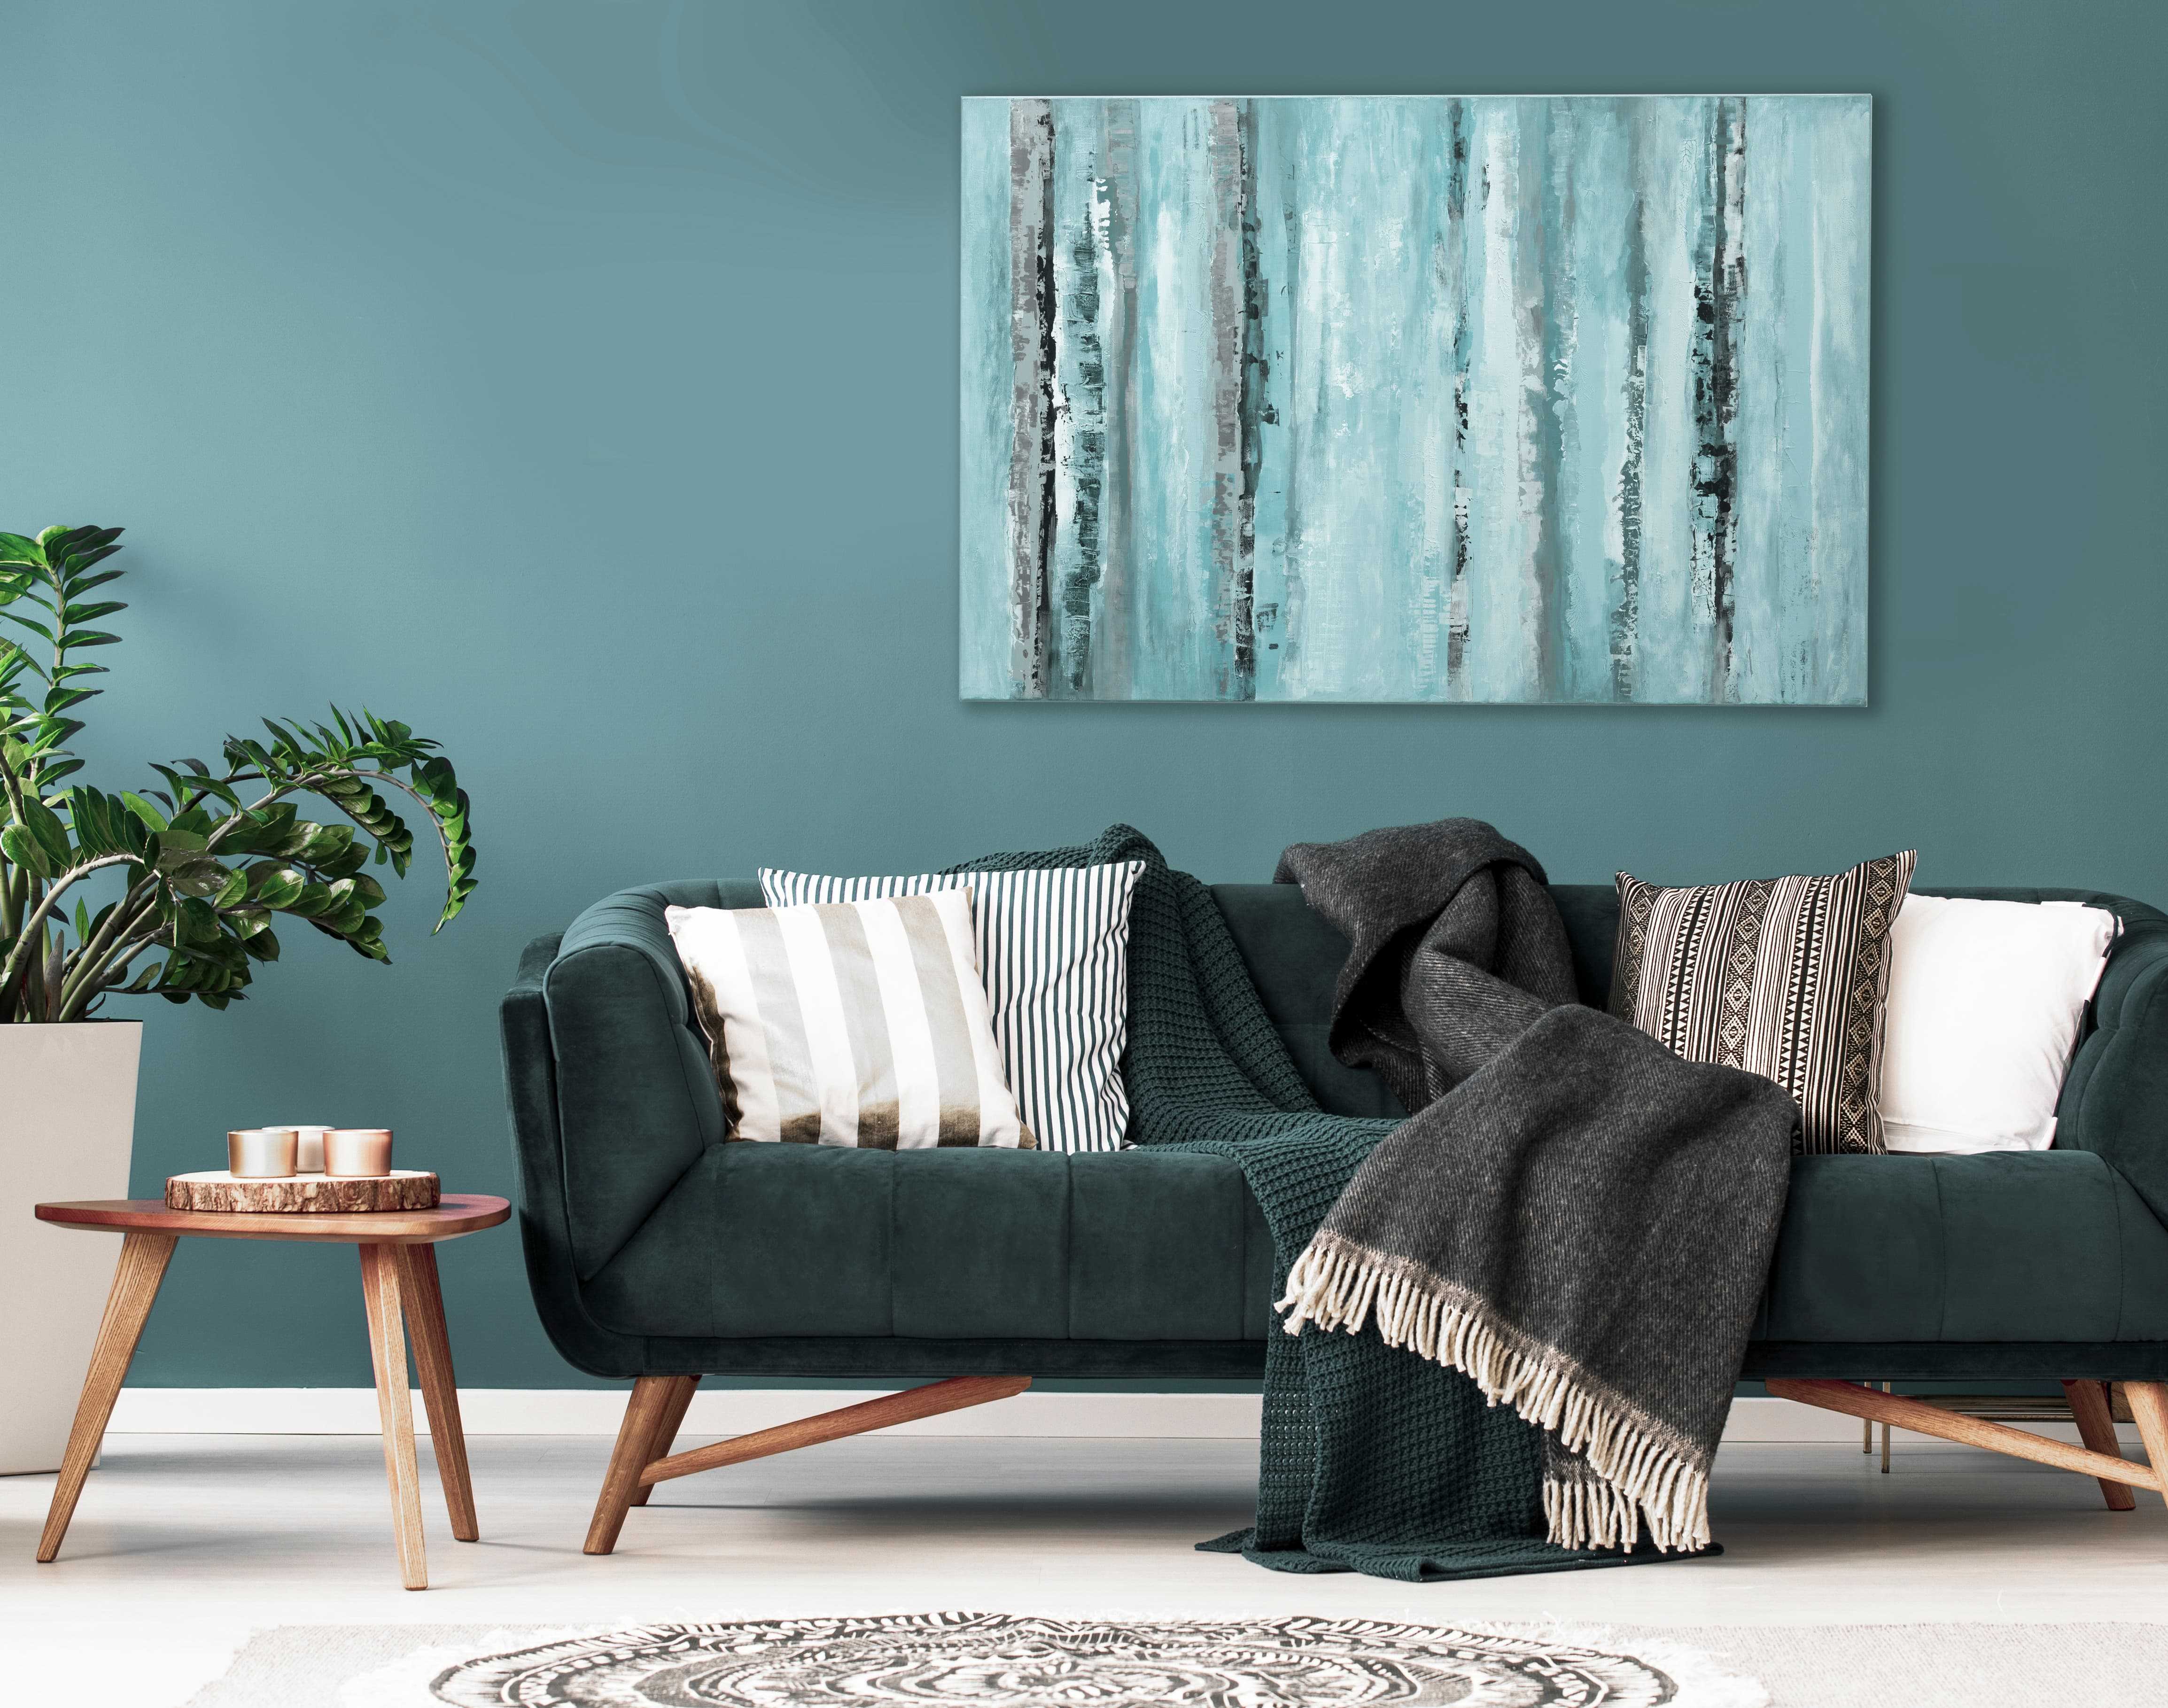 living room couch with pillows and blankets on it in front of a green wall with large artwork